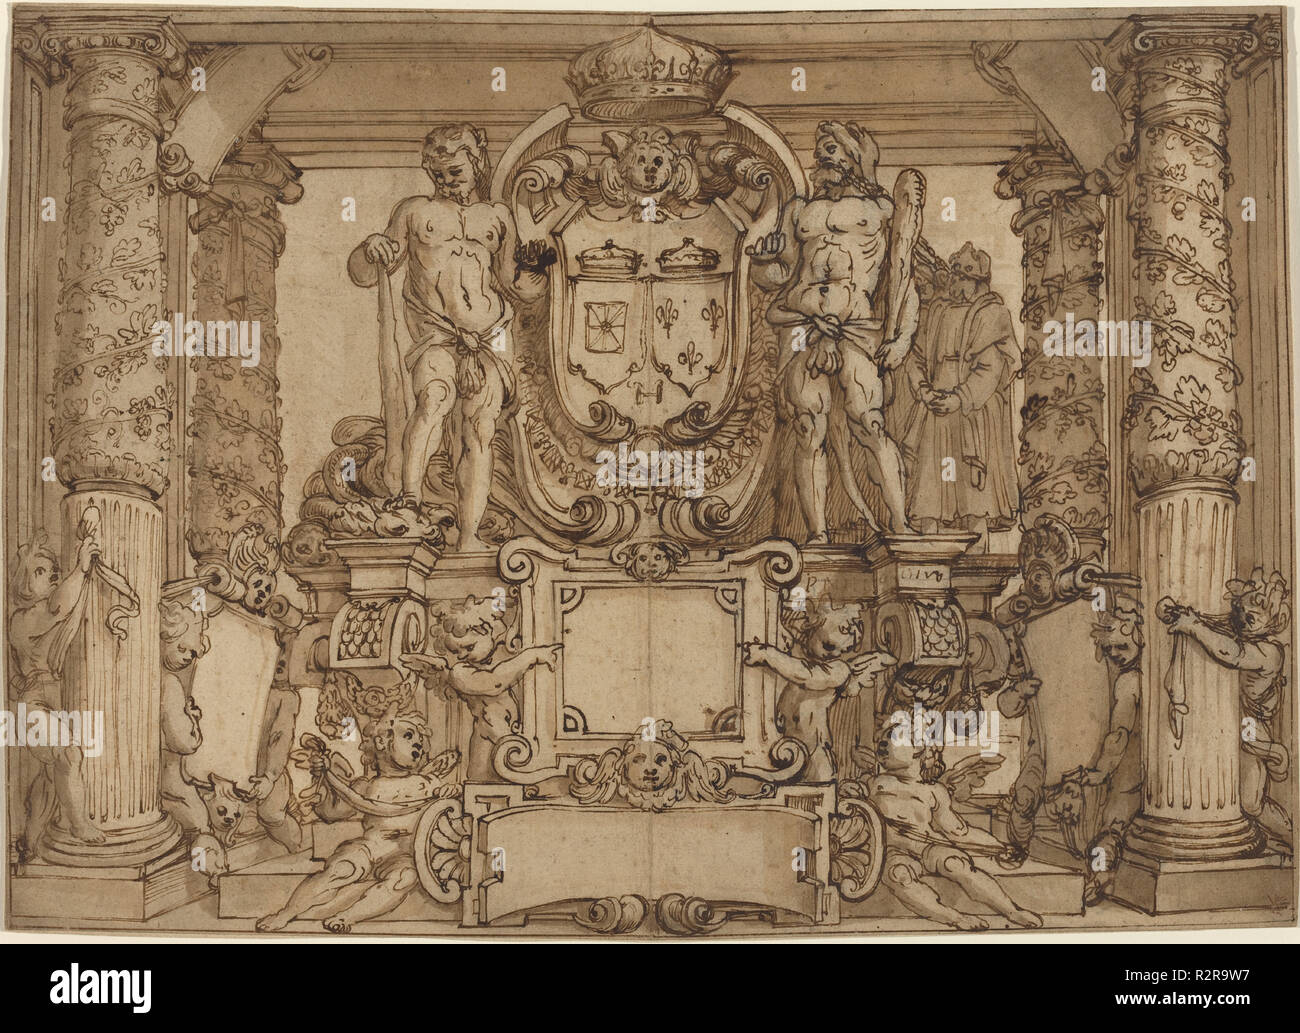 An Architectural Wall Design in Honor of Henry IV, the Gallic Hercules. Dated: c. 1600. Dimensions: overall: 33.2 x 46.6 cm (13 1/16 x 18 3/8 in.). Medium: pen and brown ink with brown wash over graphite on laid paper. Museum: National Gallery of Art, Washington DC. Author: Antonio Tempesta or Agostino Ciampelli. Stock Photo